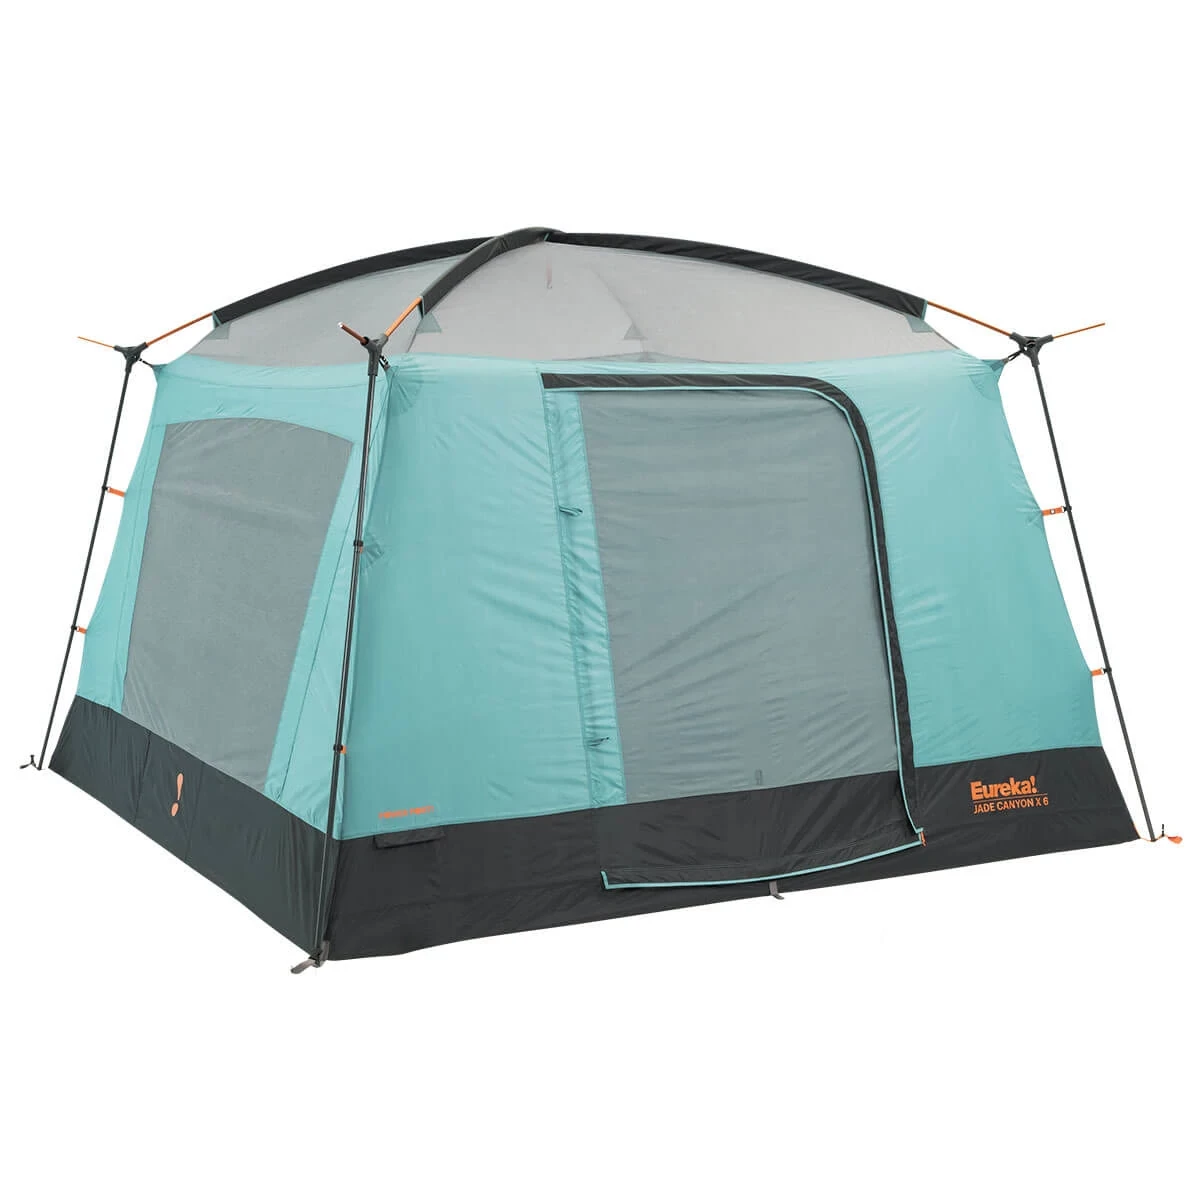 Jade Canyon X6 person tent without rainfly